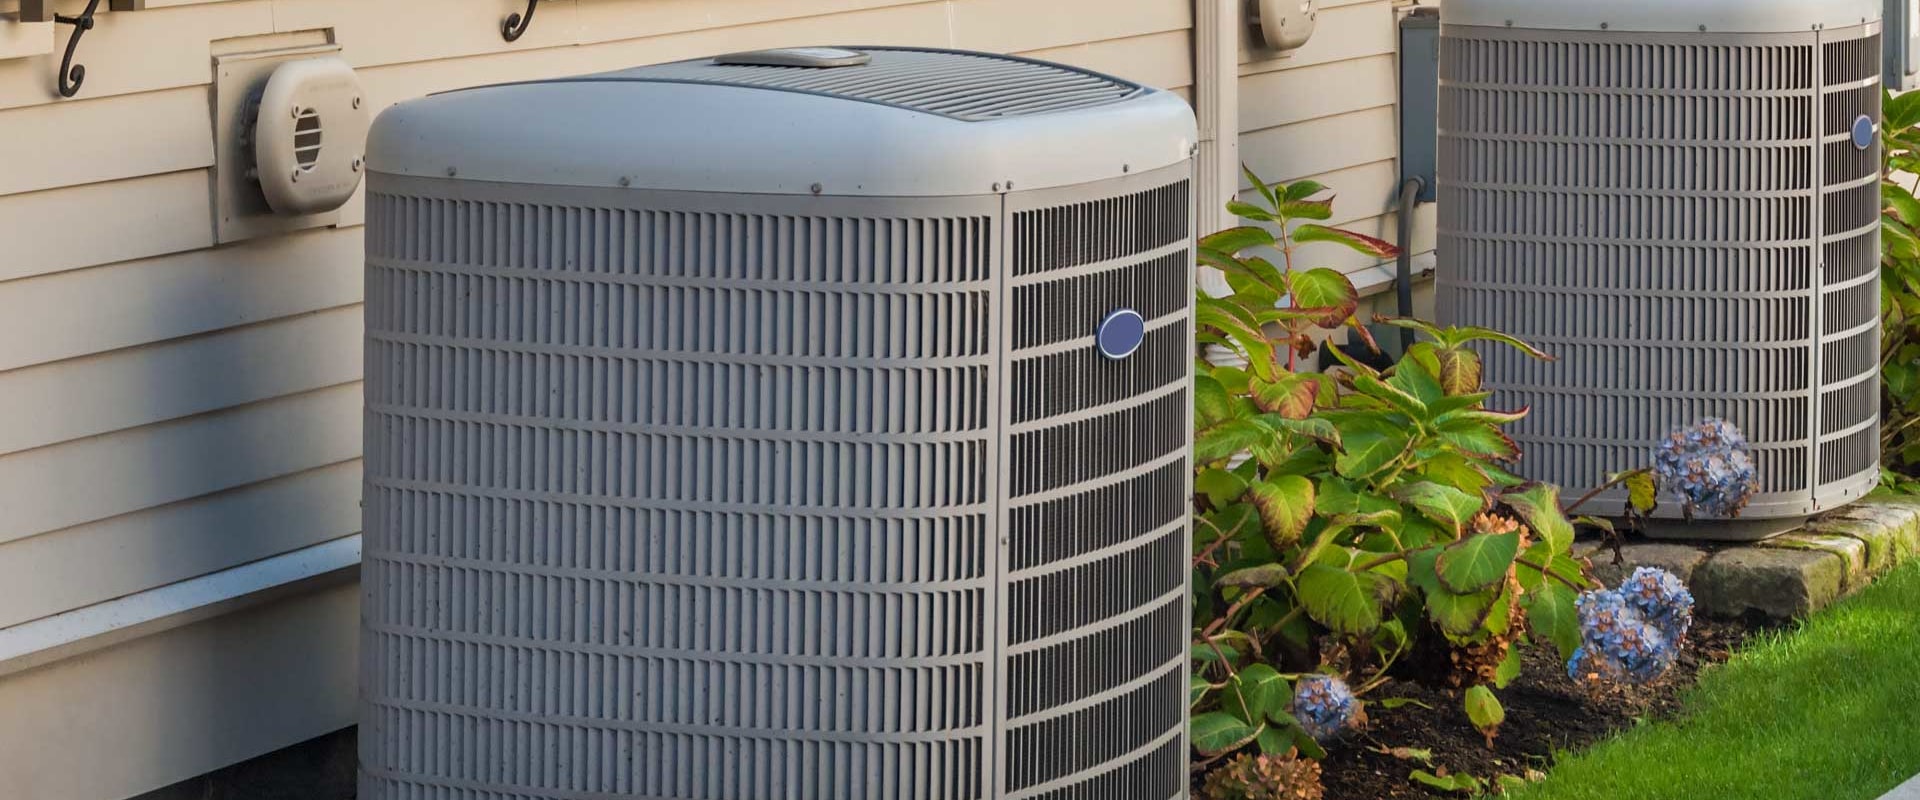 The Benefits of Hiring a Professional Air Conditioner Repair Service